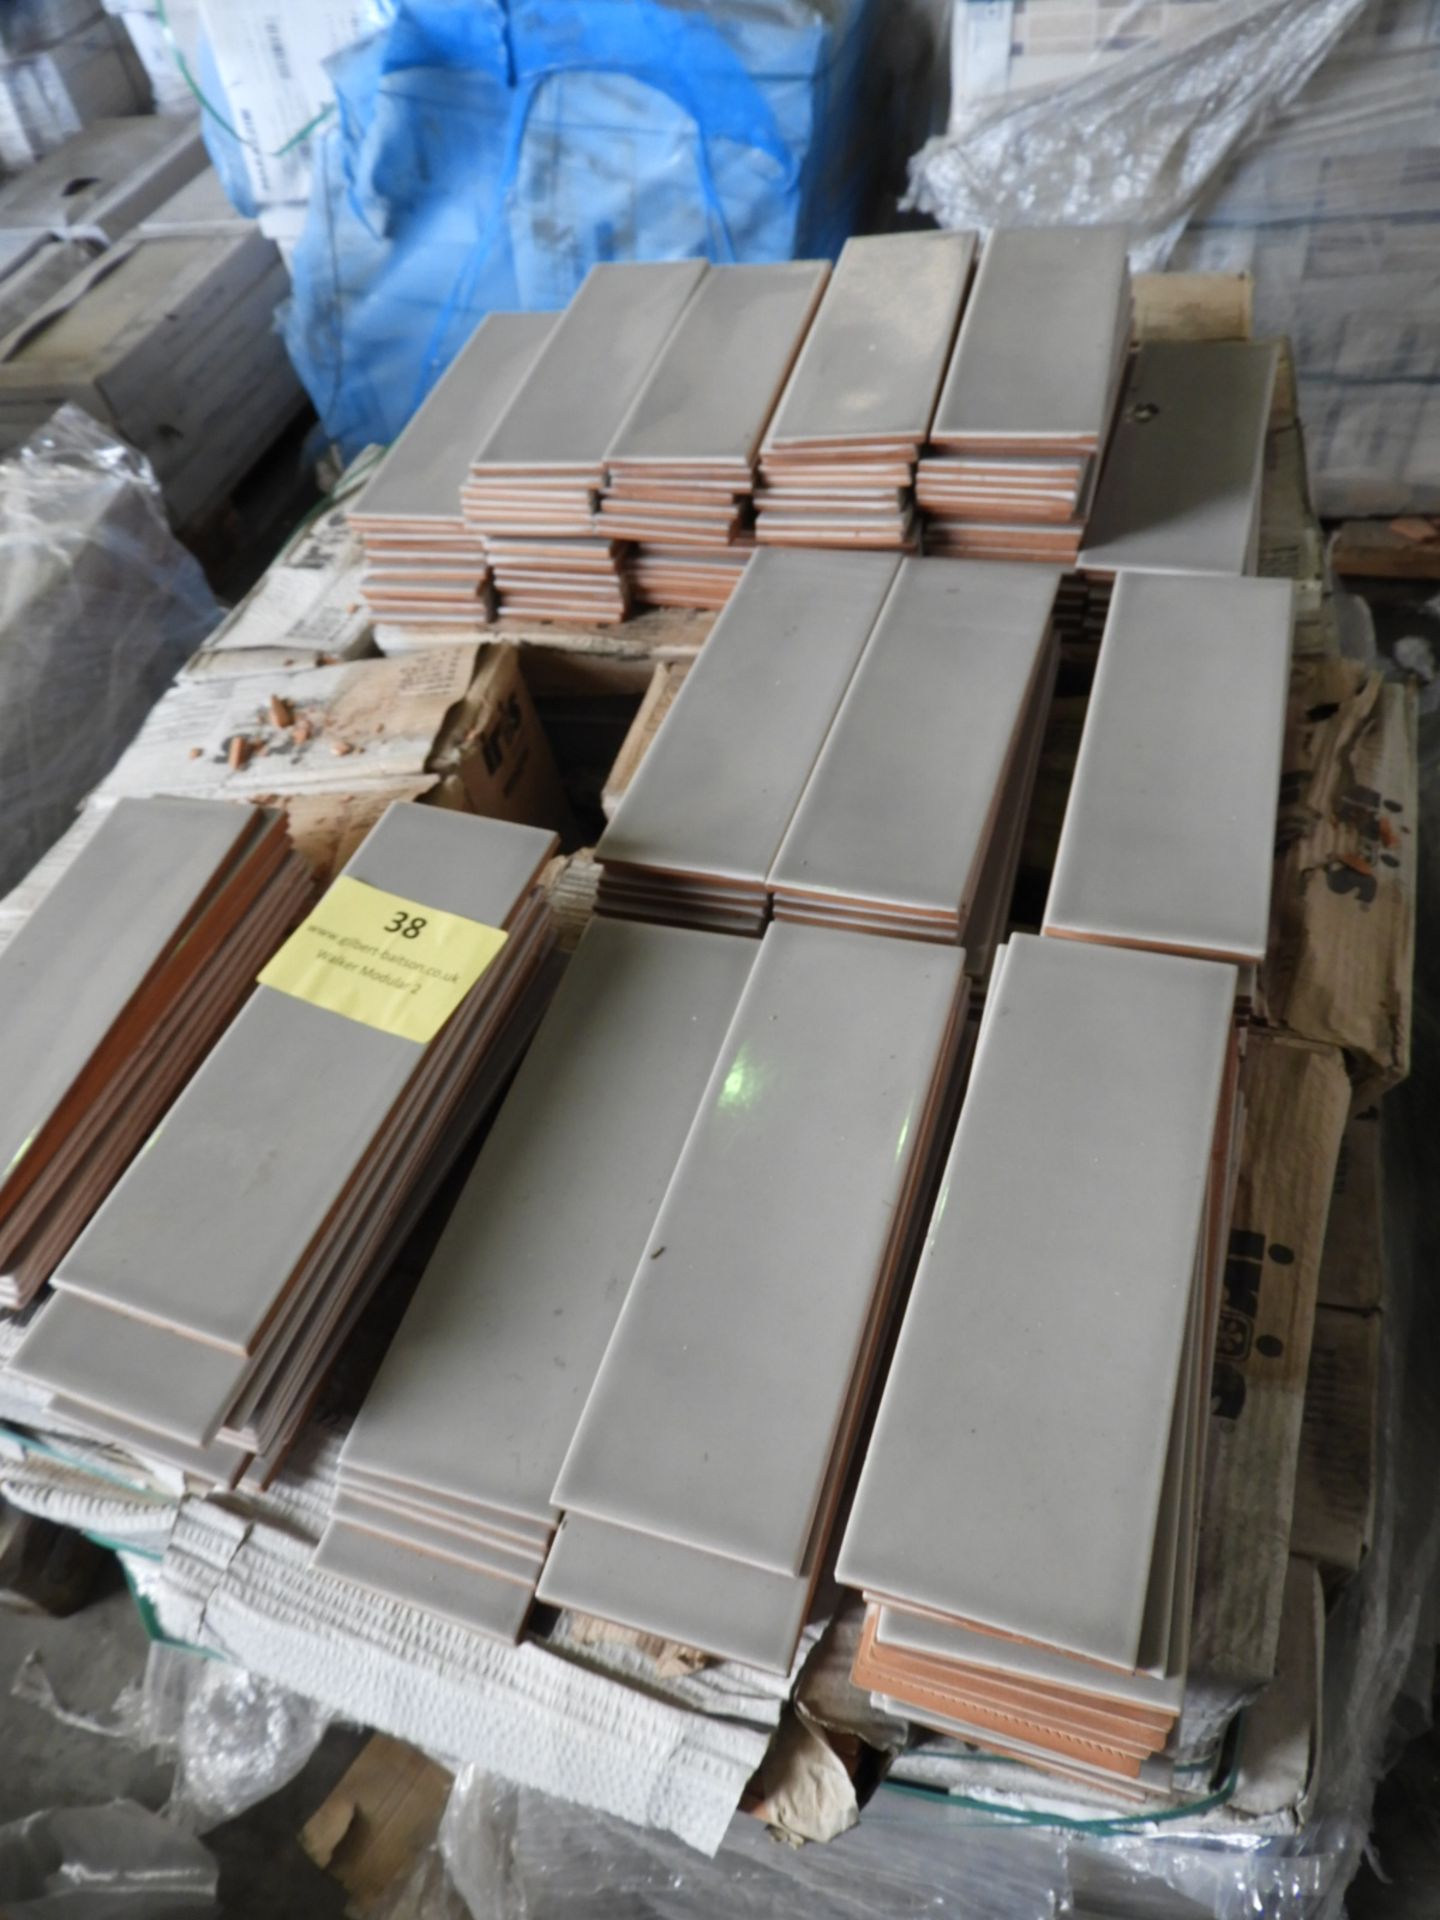 *Approximately 50 Boxes of 34 Iros Ceramic Tiles 1